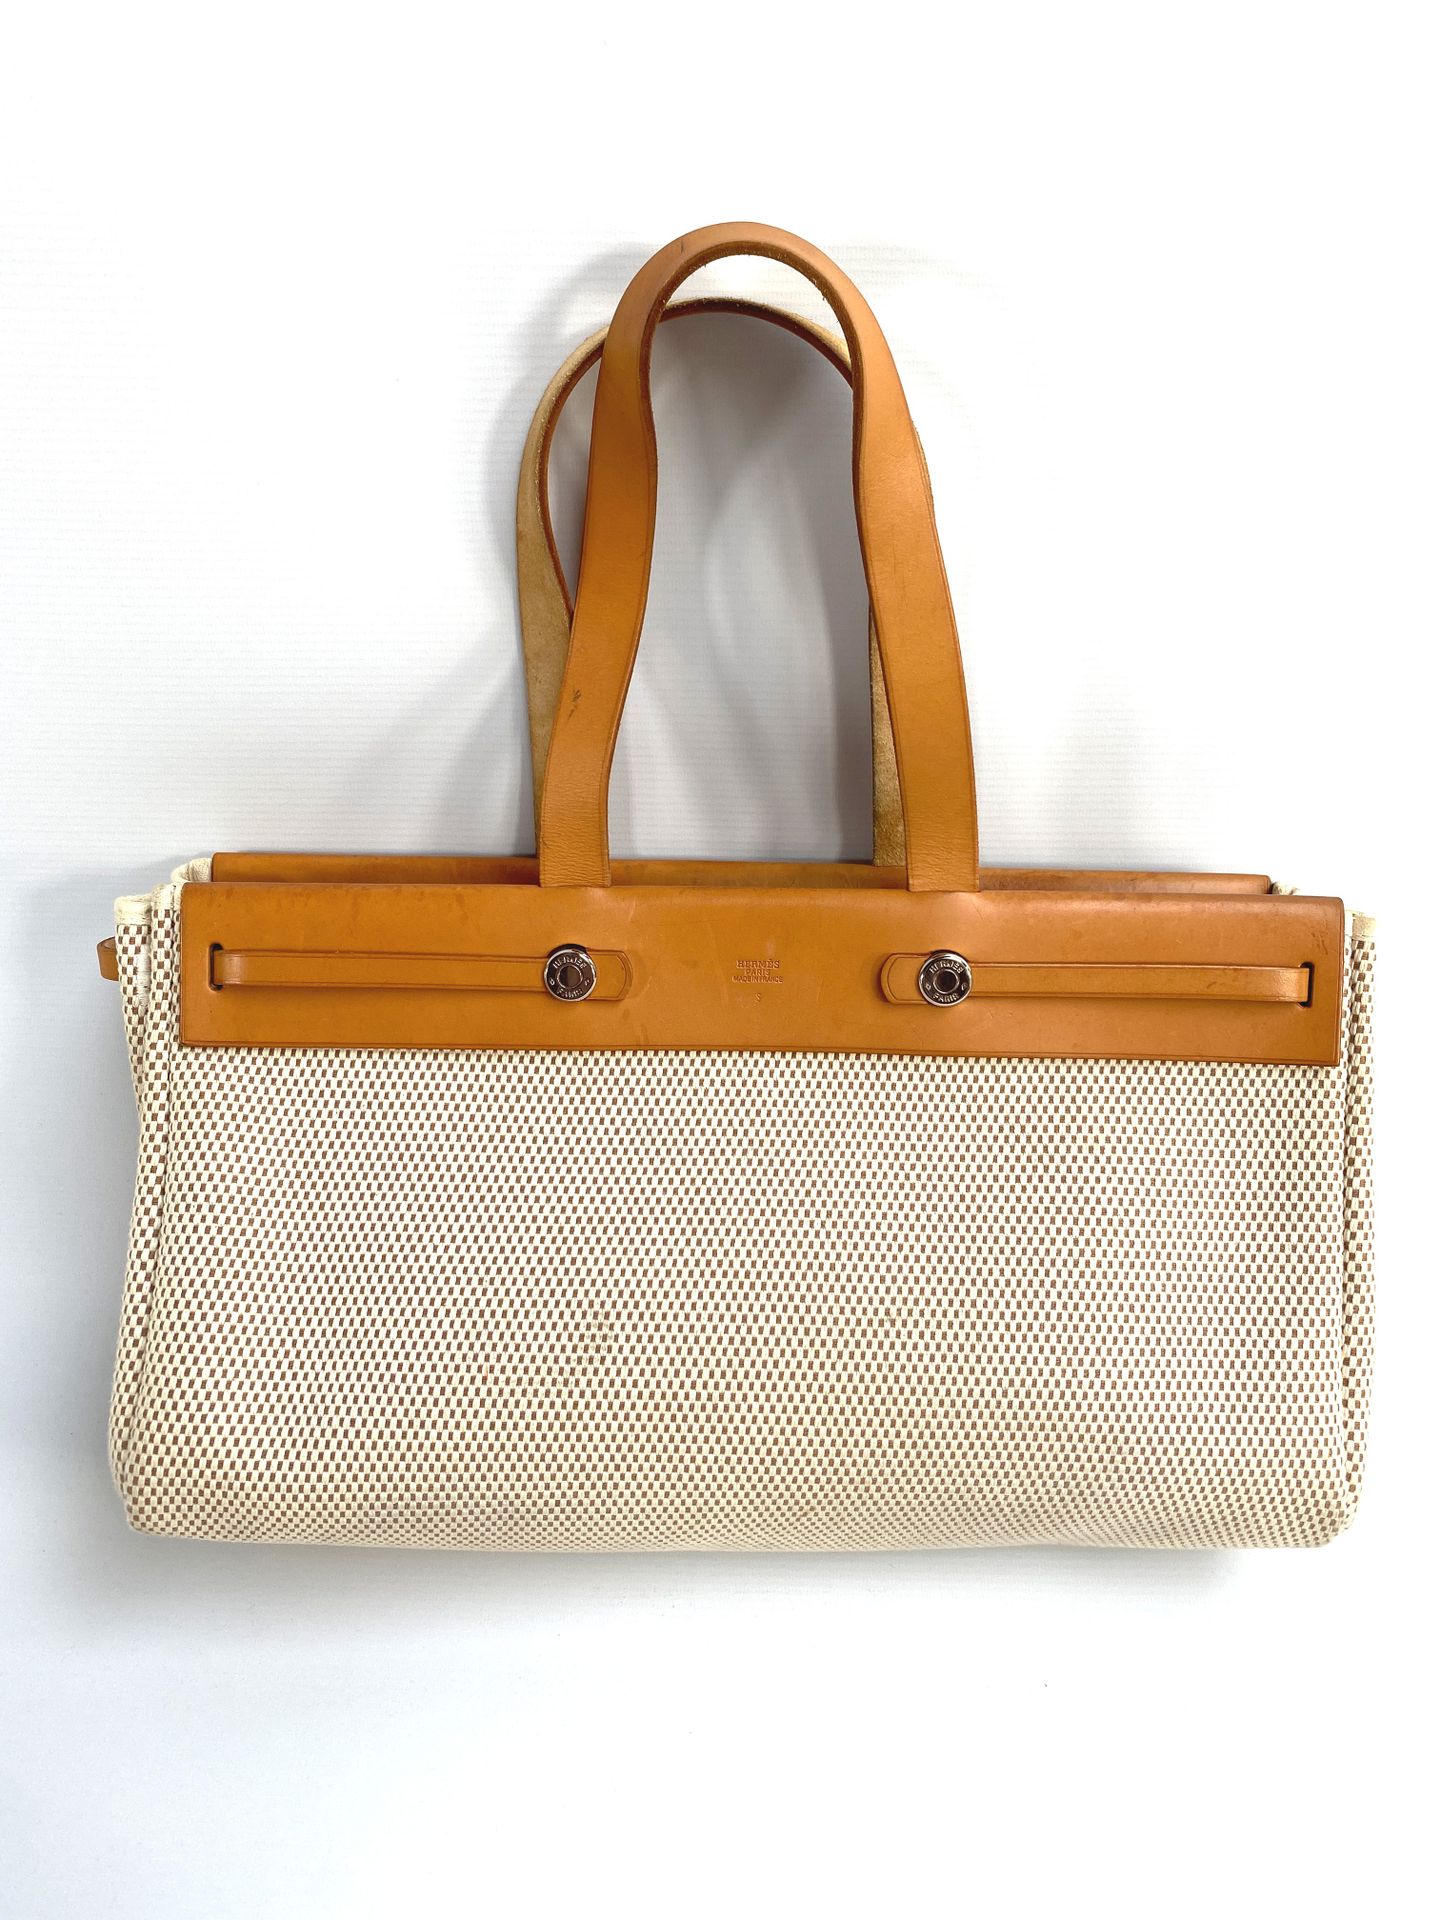 HERMES, Beige canvas and tan leather tote bag. With its …